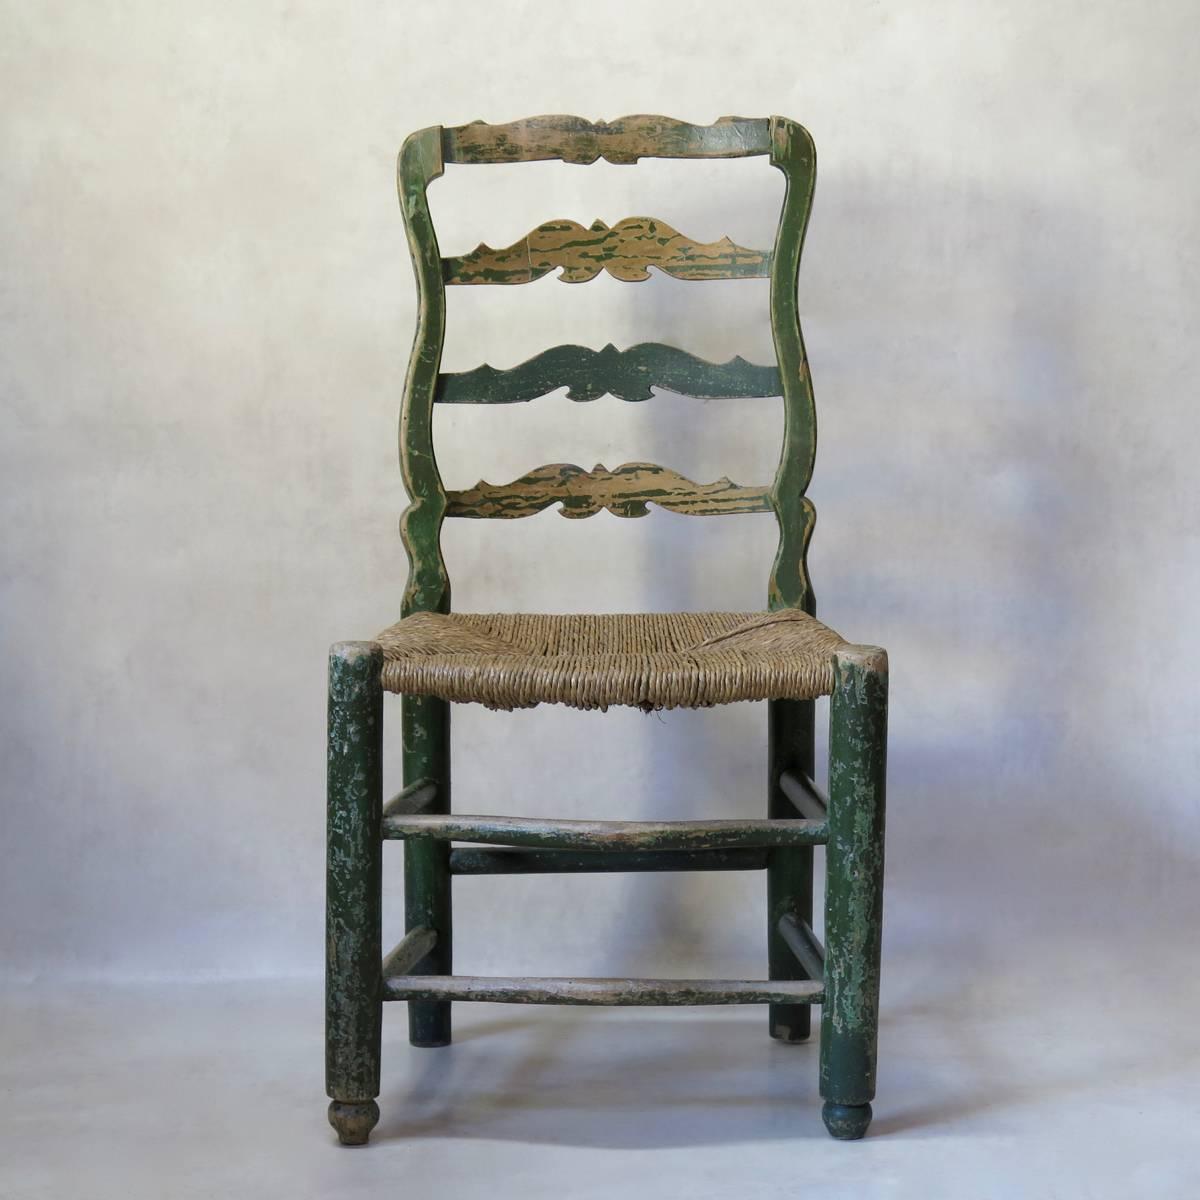 Handsome set of four antique beechwood chairs, with original green paint, and rush seats. Elegantly curved front foot rests. Wide and comfortable.